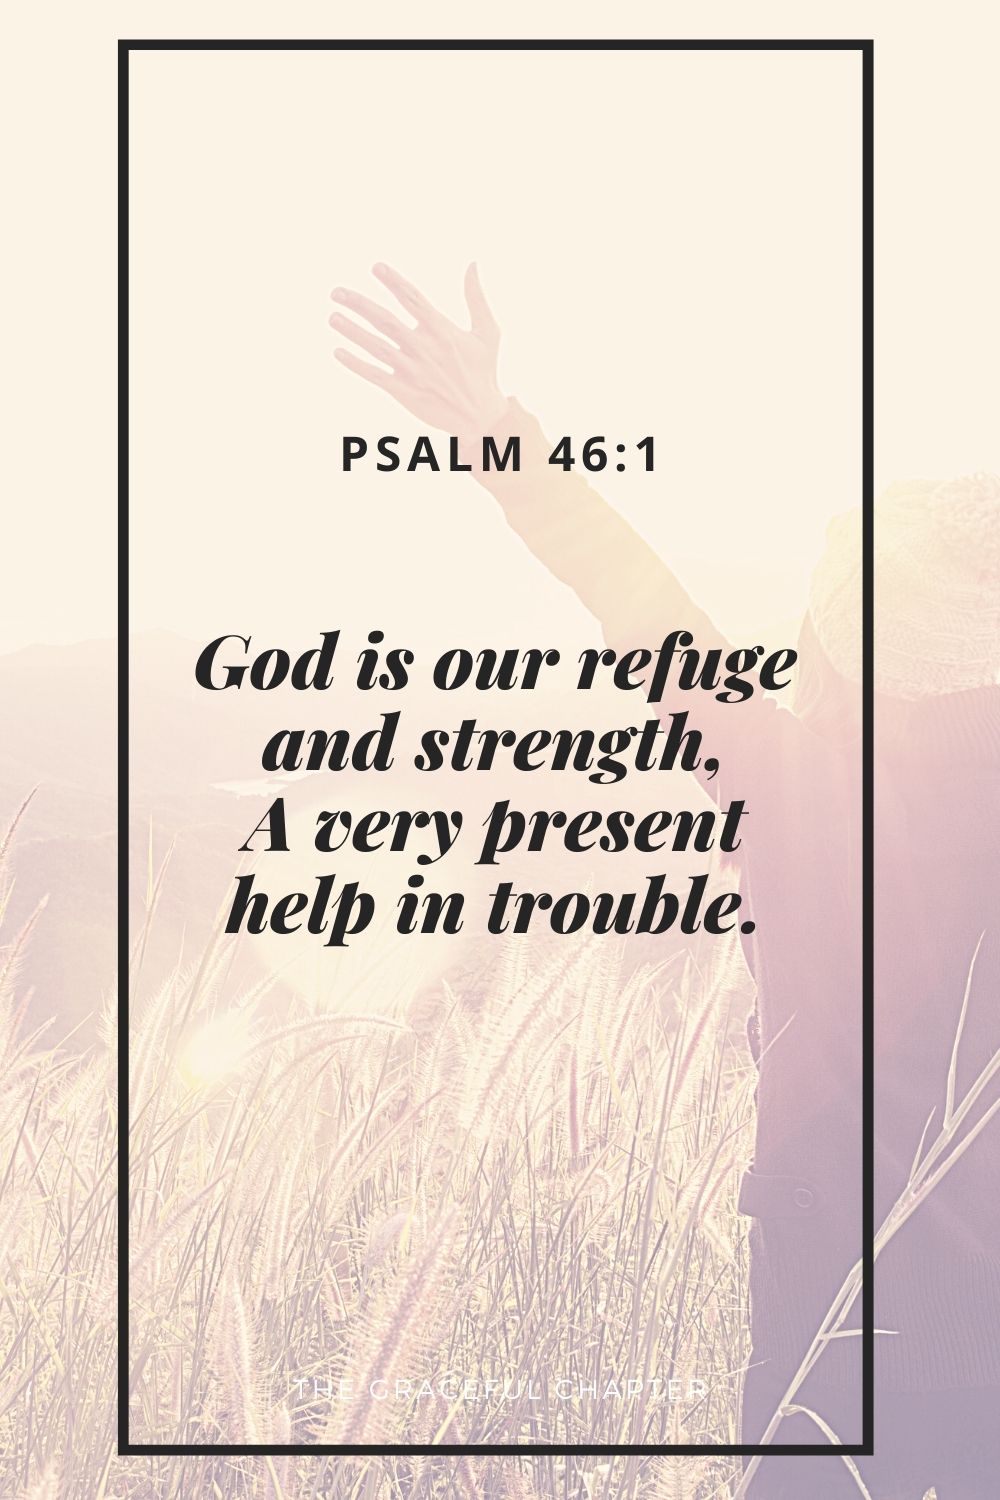 God is our refuge and strength, A very present help in trouble. Psalm 46:1